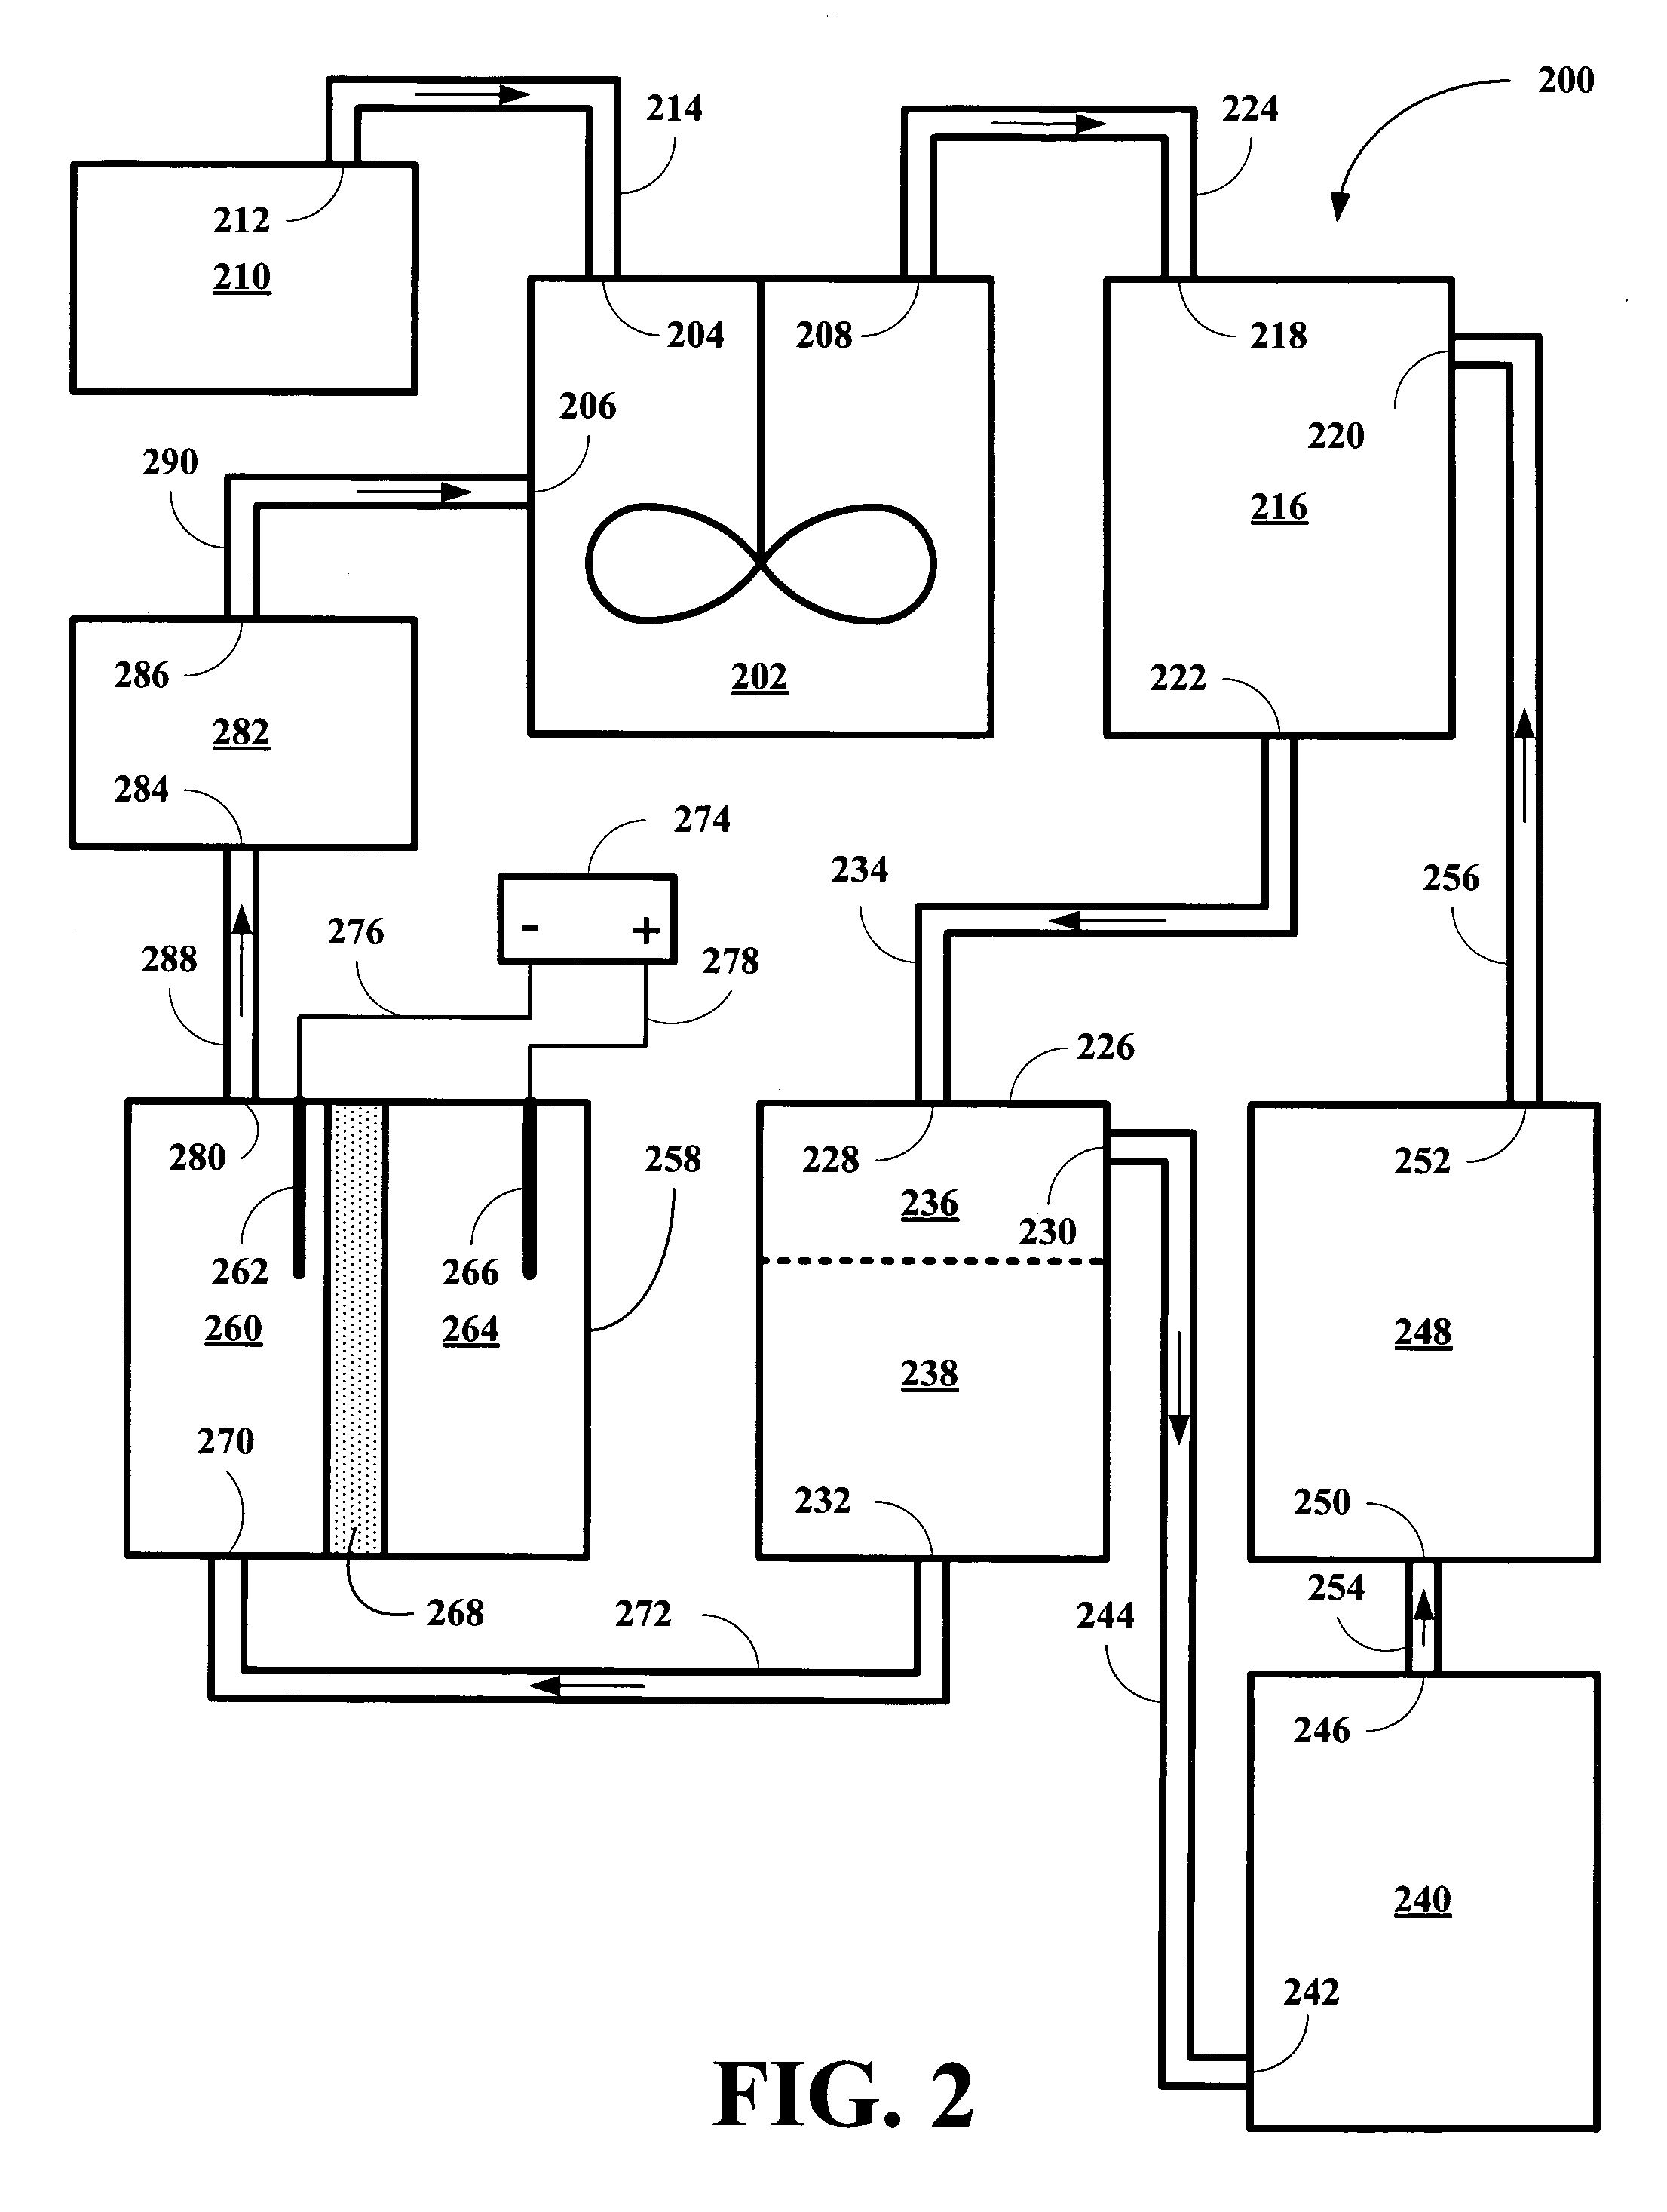 Coupled electrochemical method for reduction of polyols to hydrocarbons